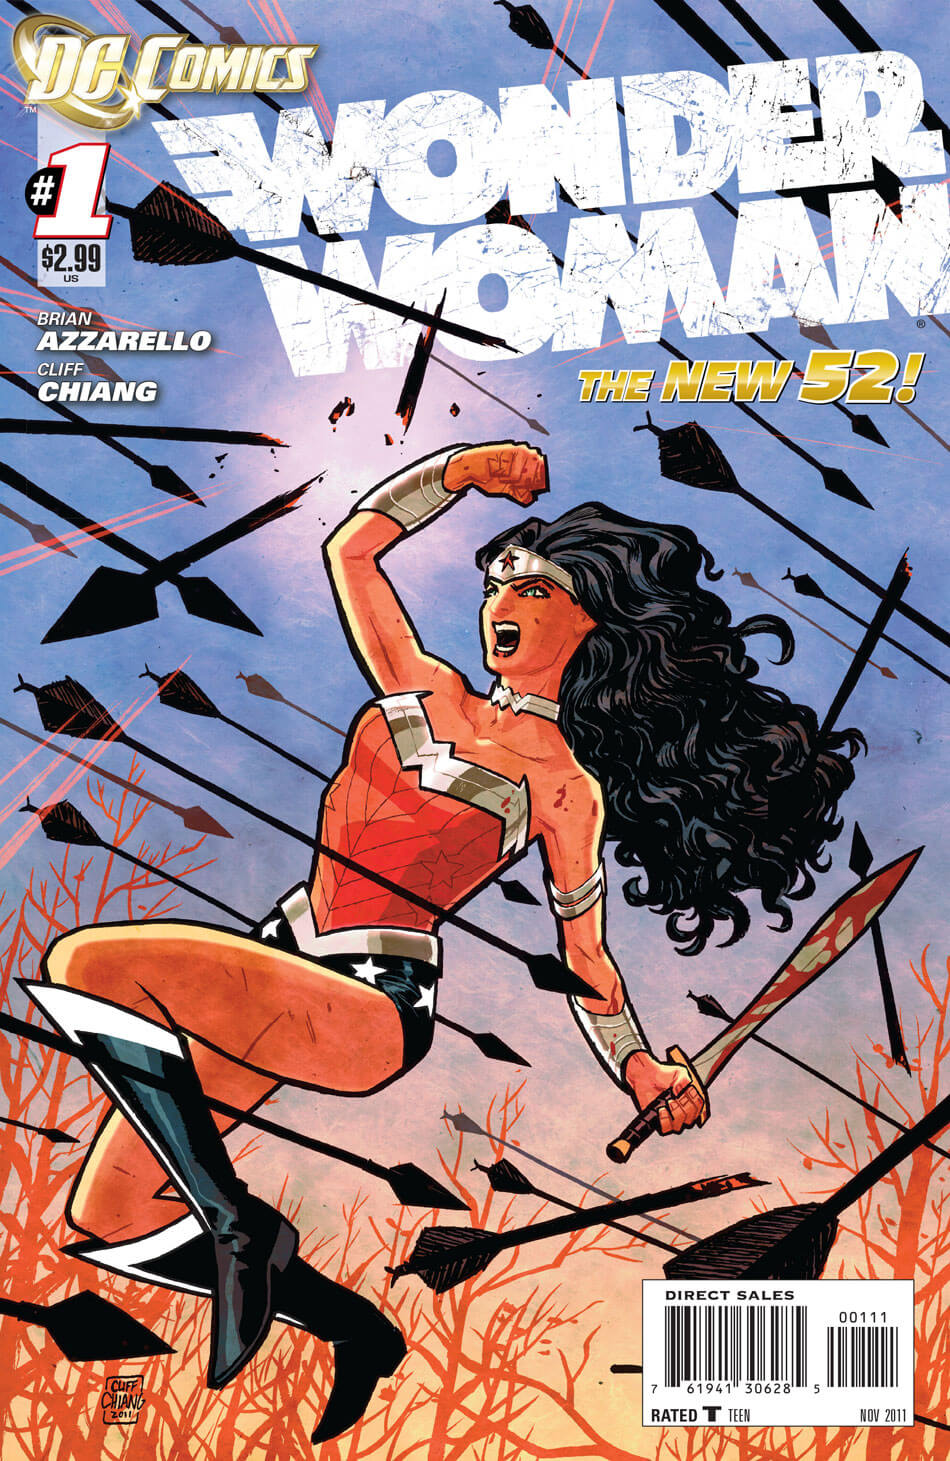 Wonder-Woman-#1-cover-by-Cliff-Chiang